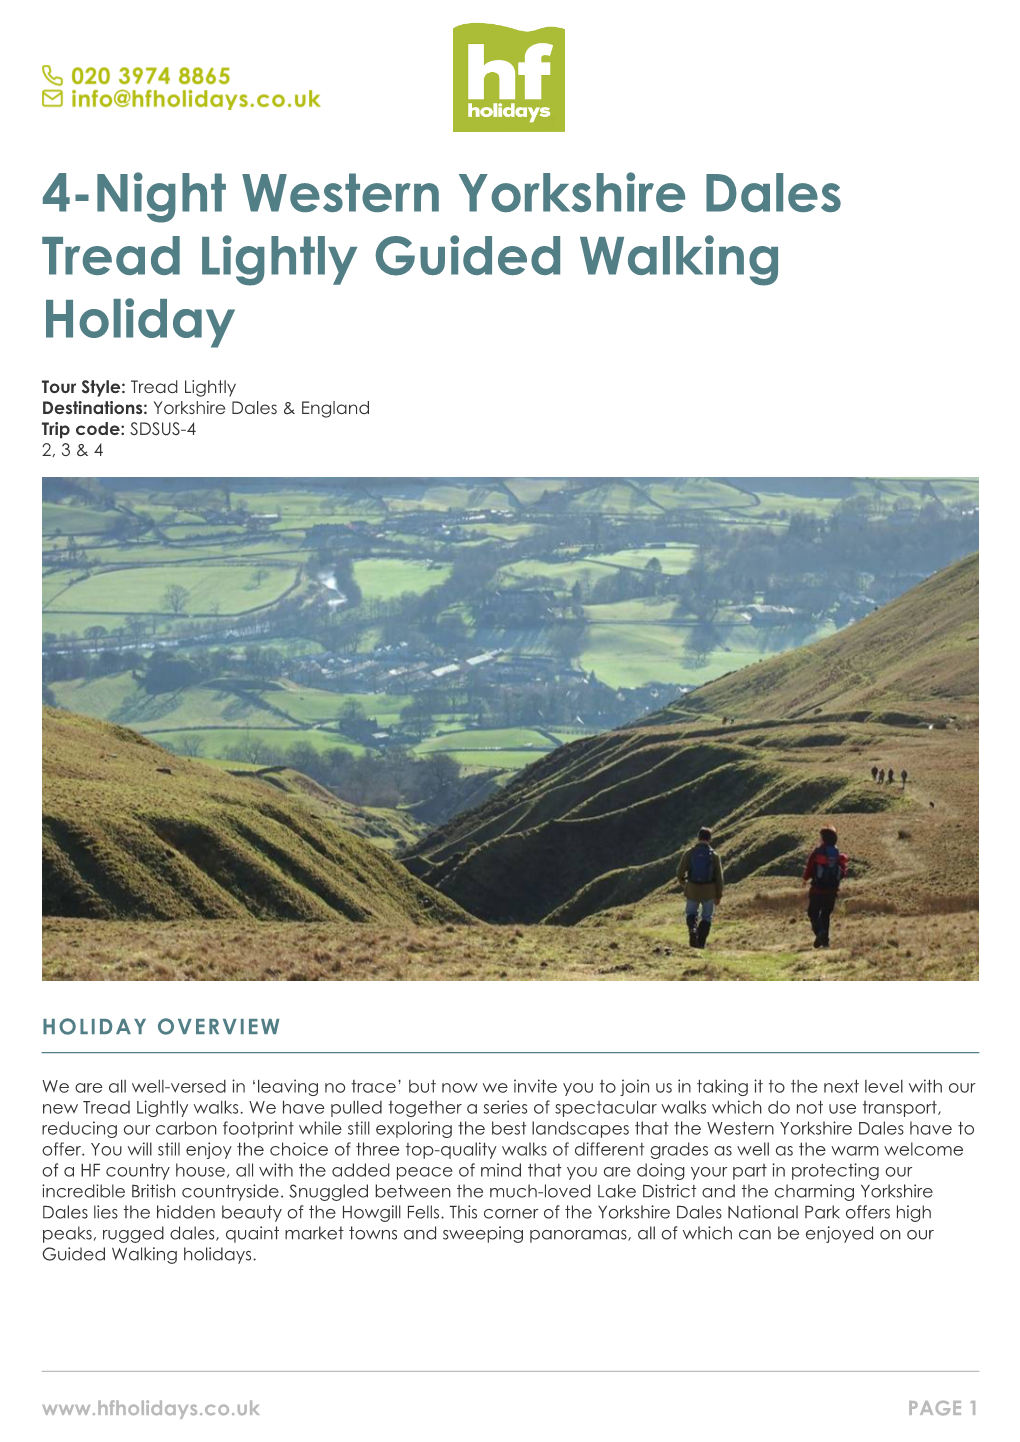 4-Night Western Yorkshire Dales Tread Lightly Guided Walking Holiday